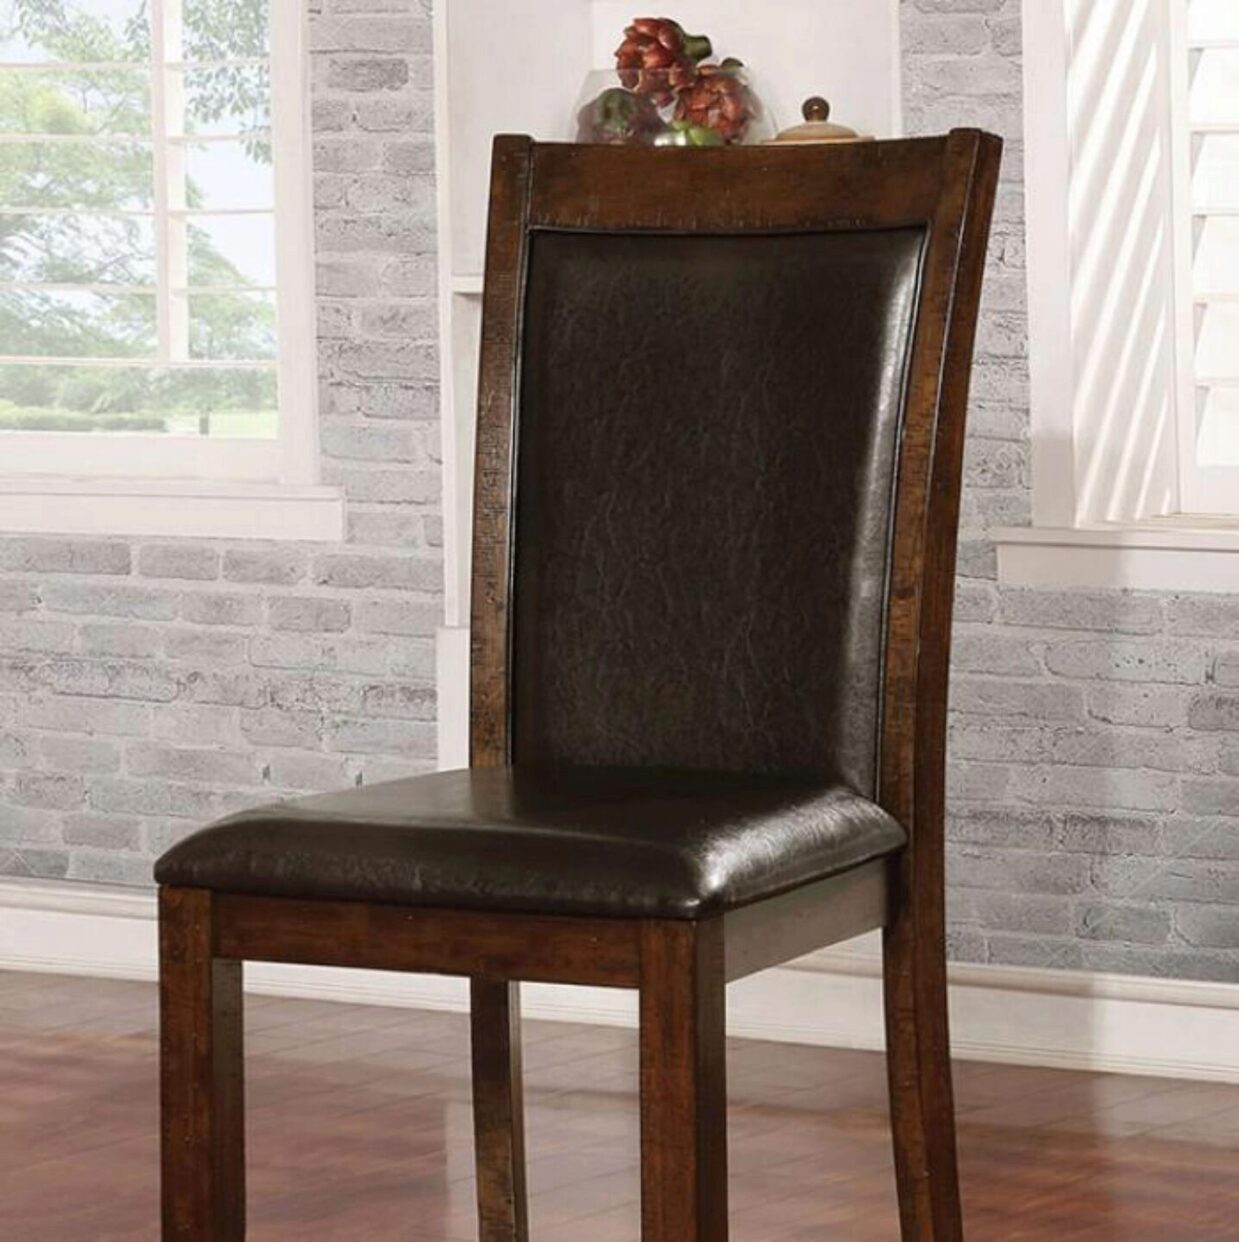 Maegan II Brown Cherry Transitional Style Side Chair Set of 2